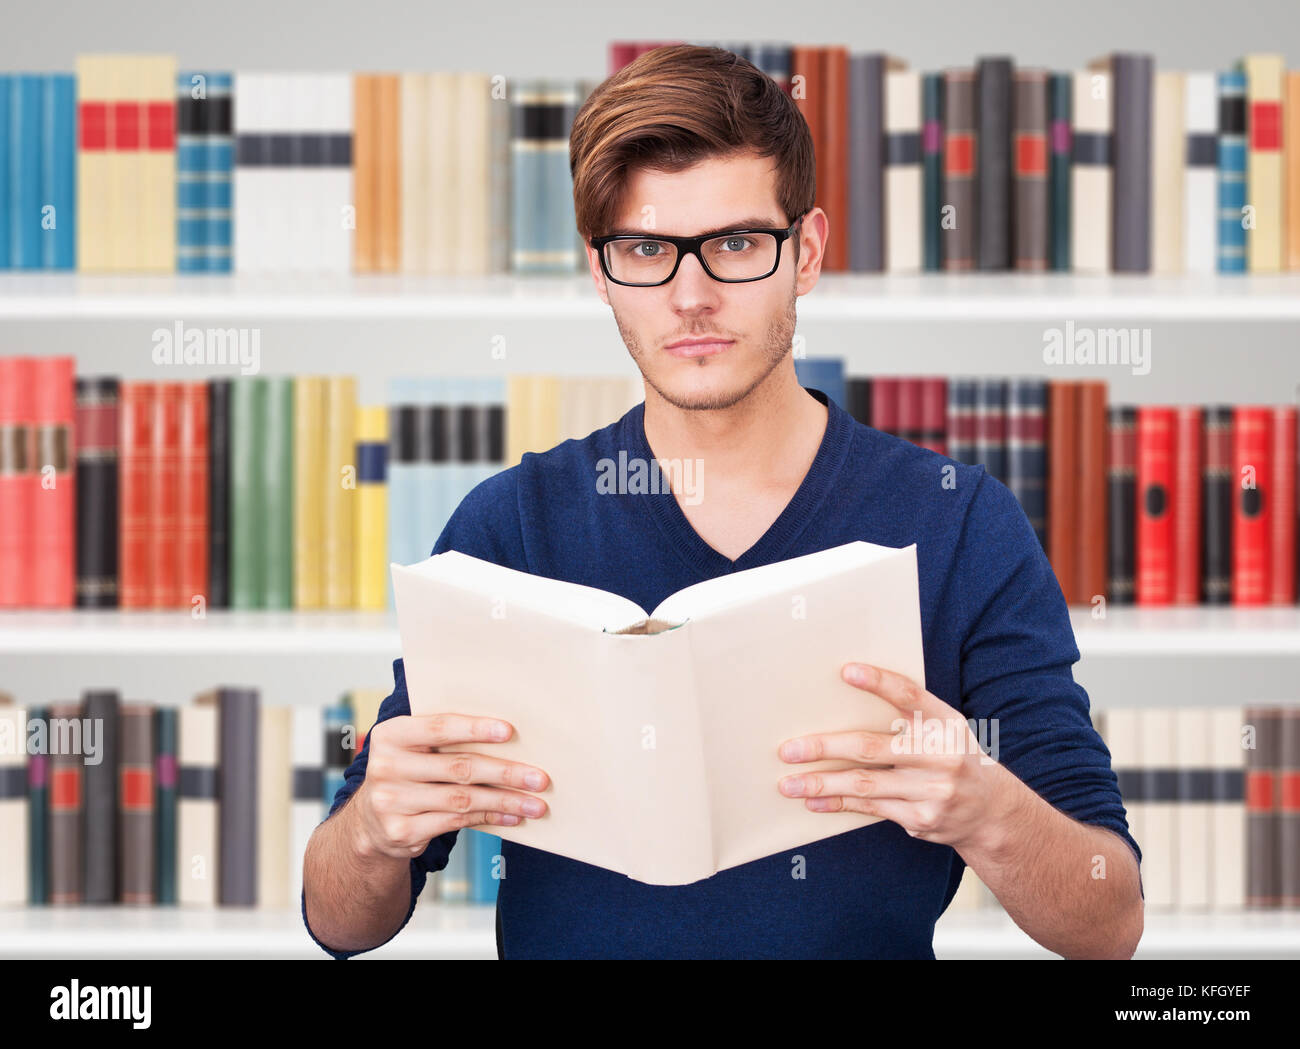 Portrait Of A Man Holding Book In Library Stock Photo